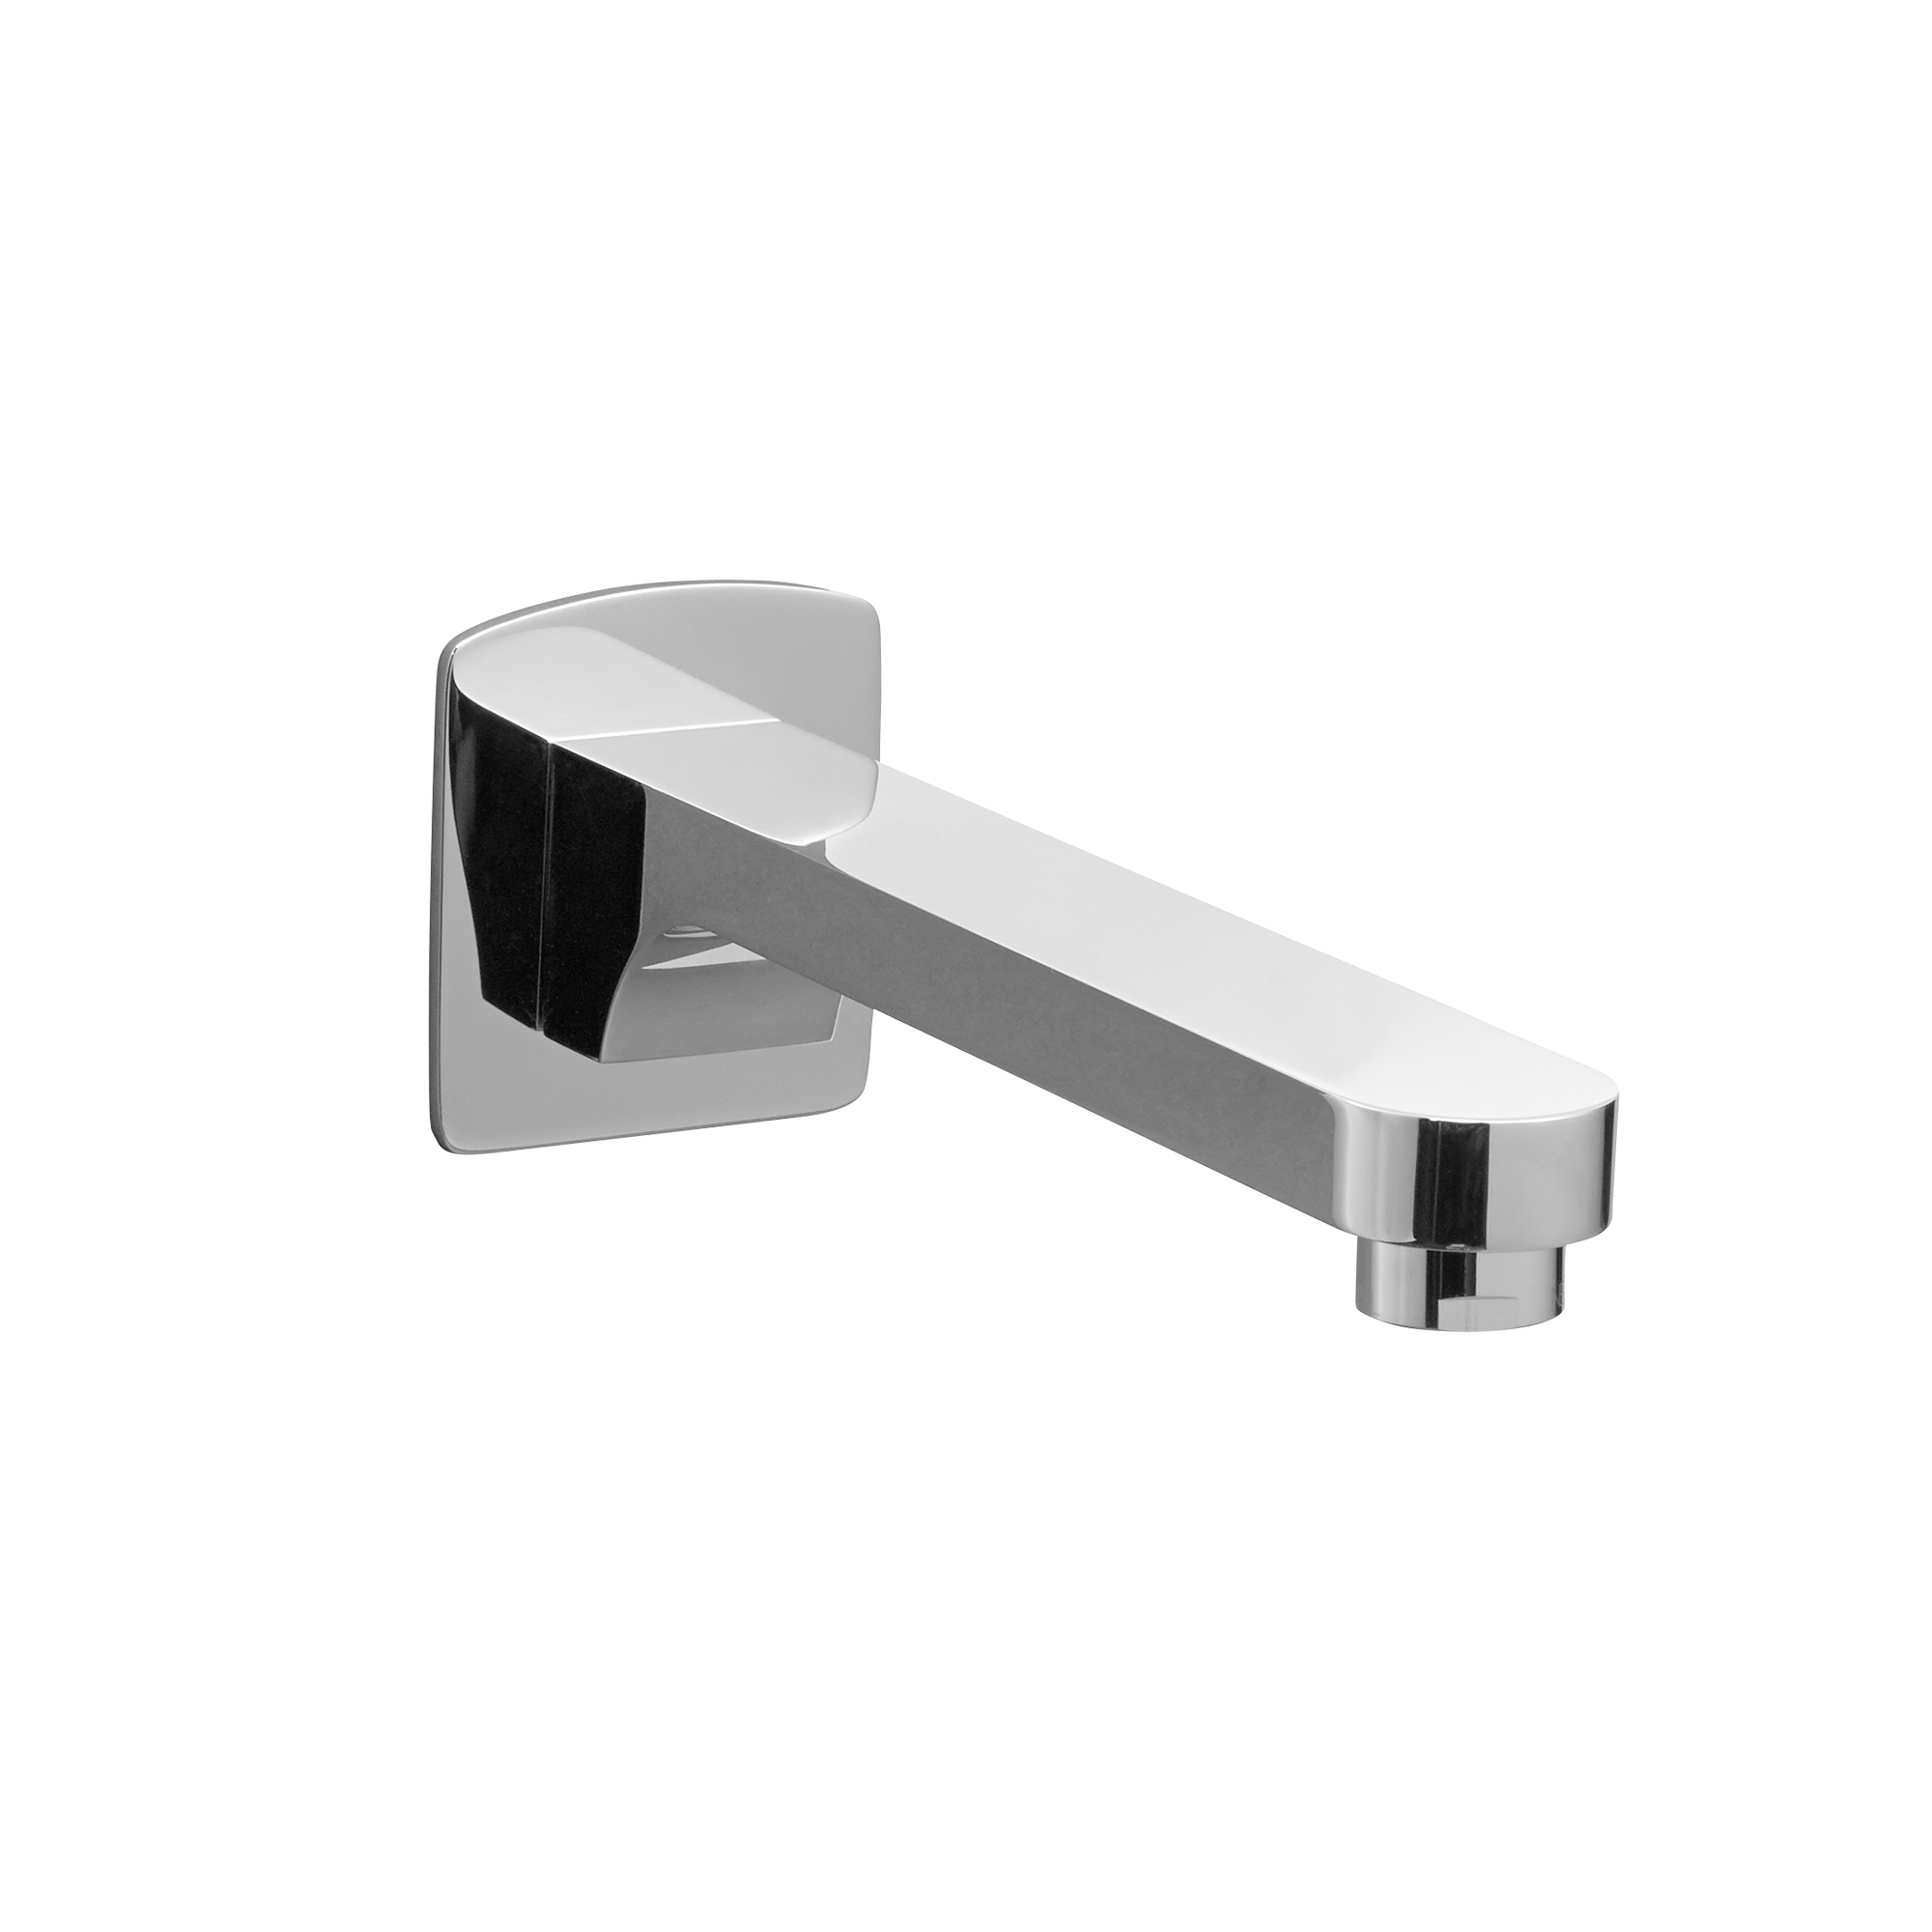 EQUILITY WALL TUB SPOUT